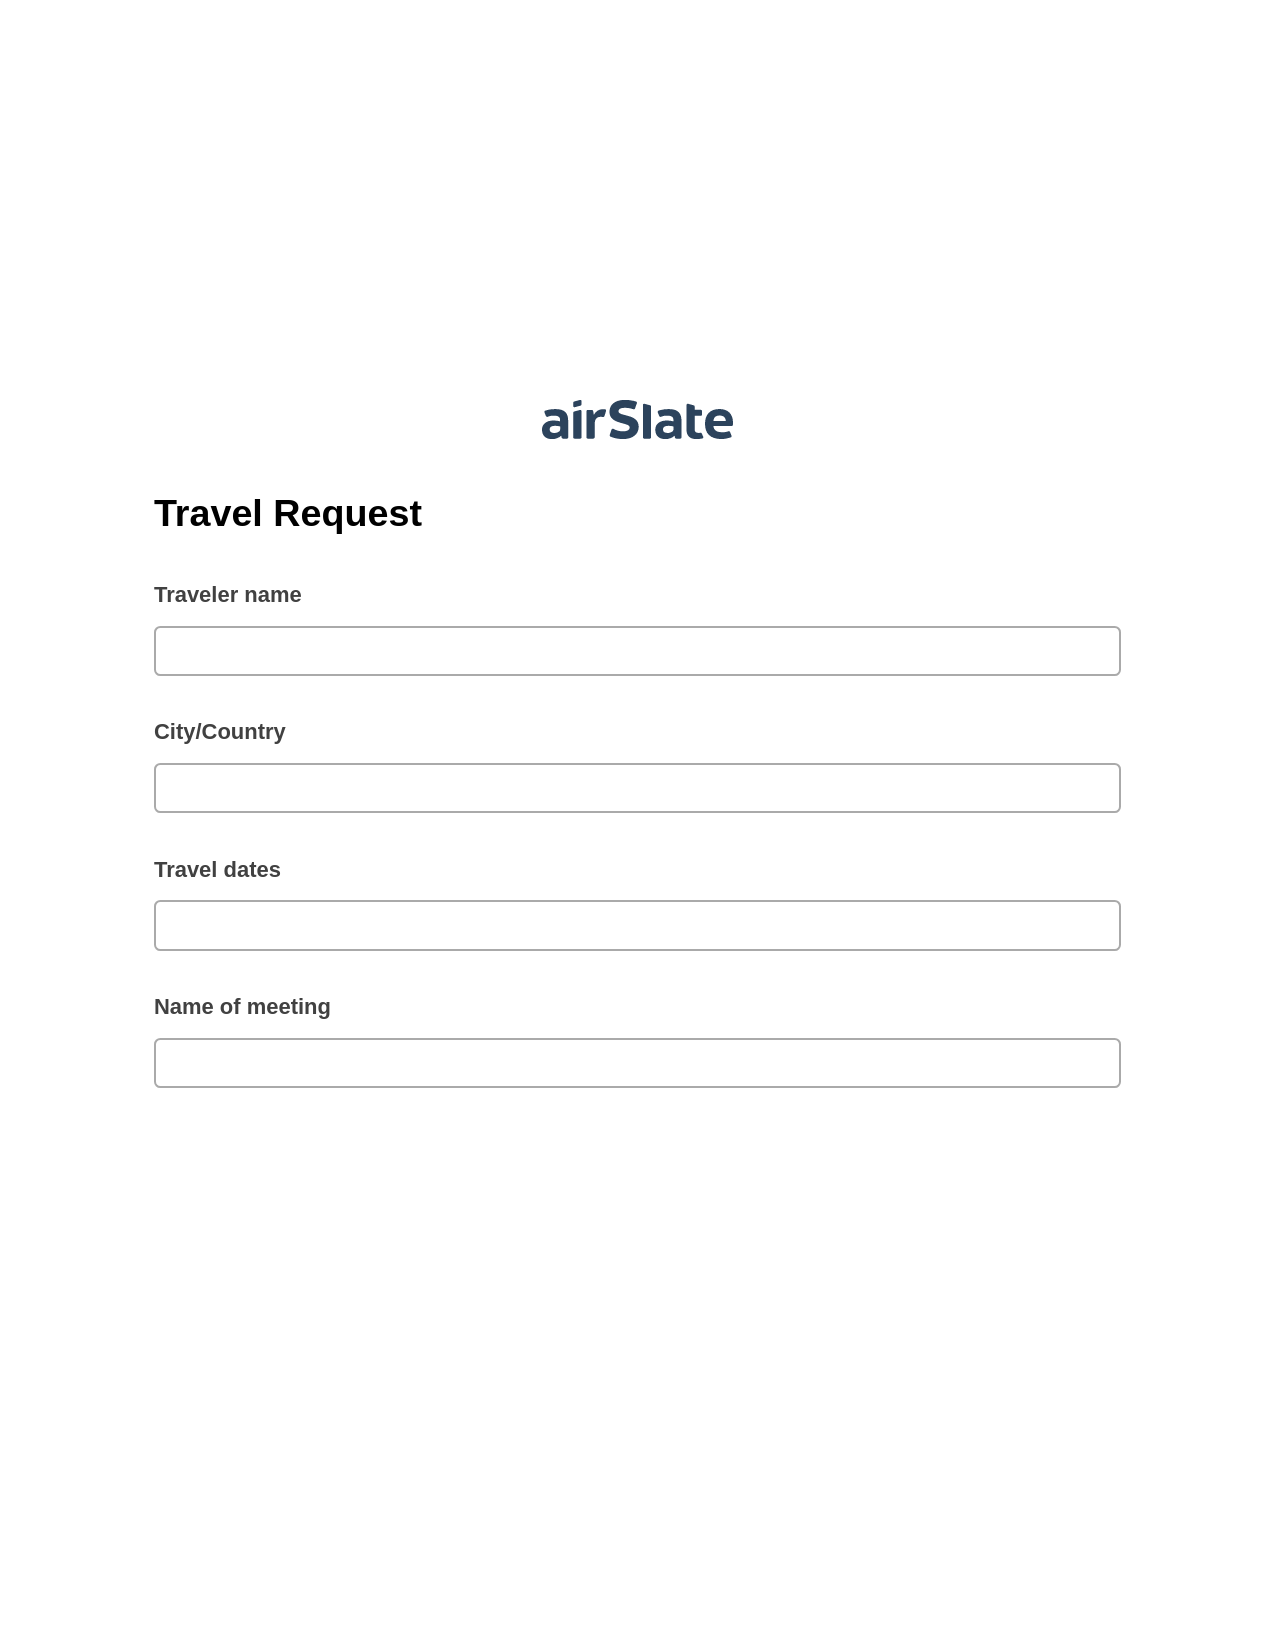 Travel Request Pre-fill from Excel Spreadsheet Bot, Reminder Bot, Export to NetSuite Record Bot